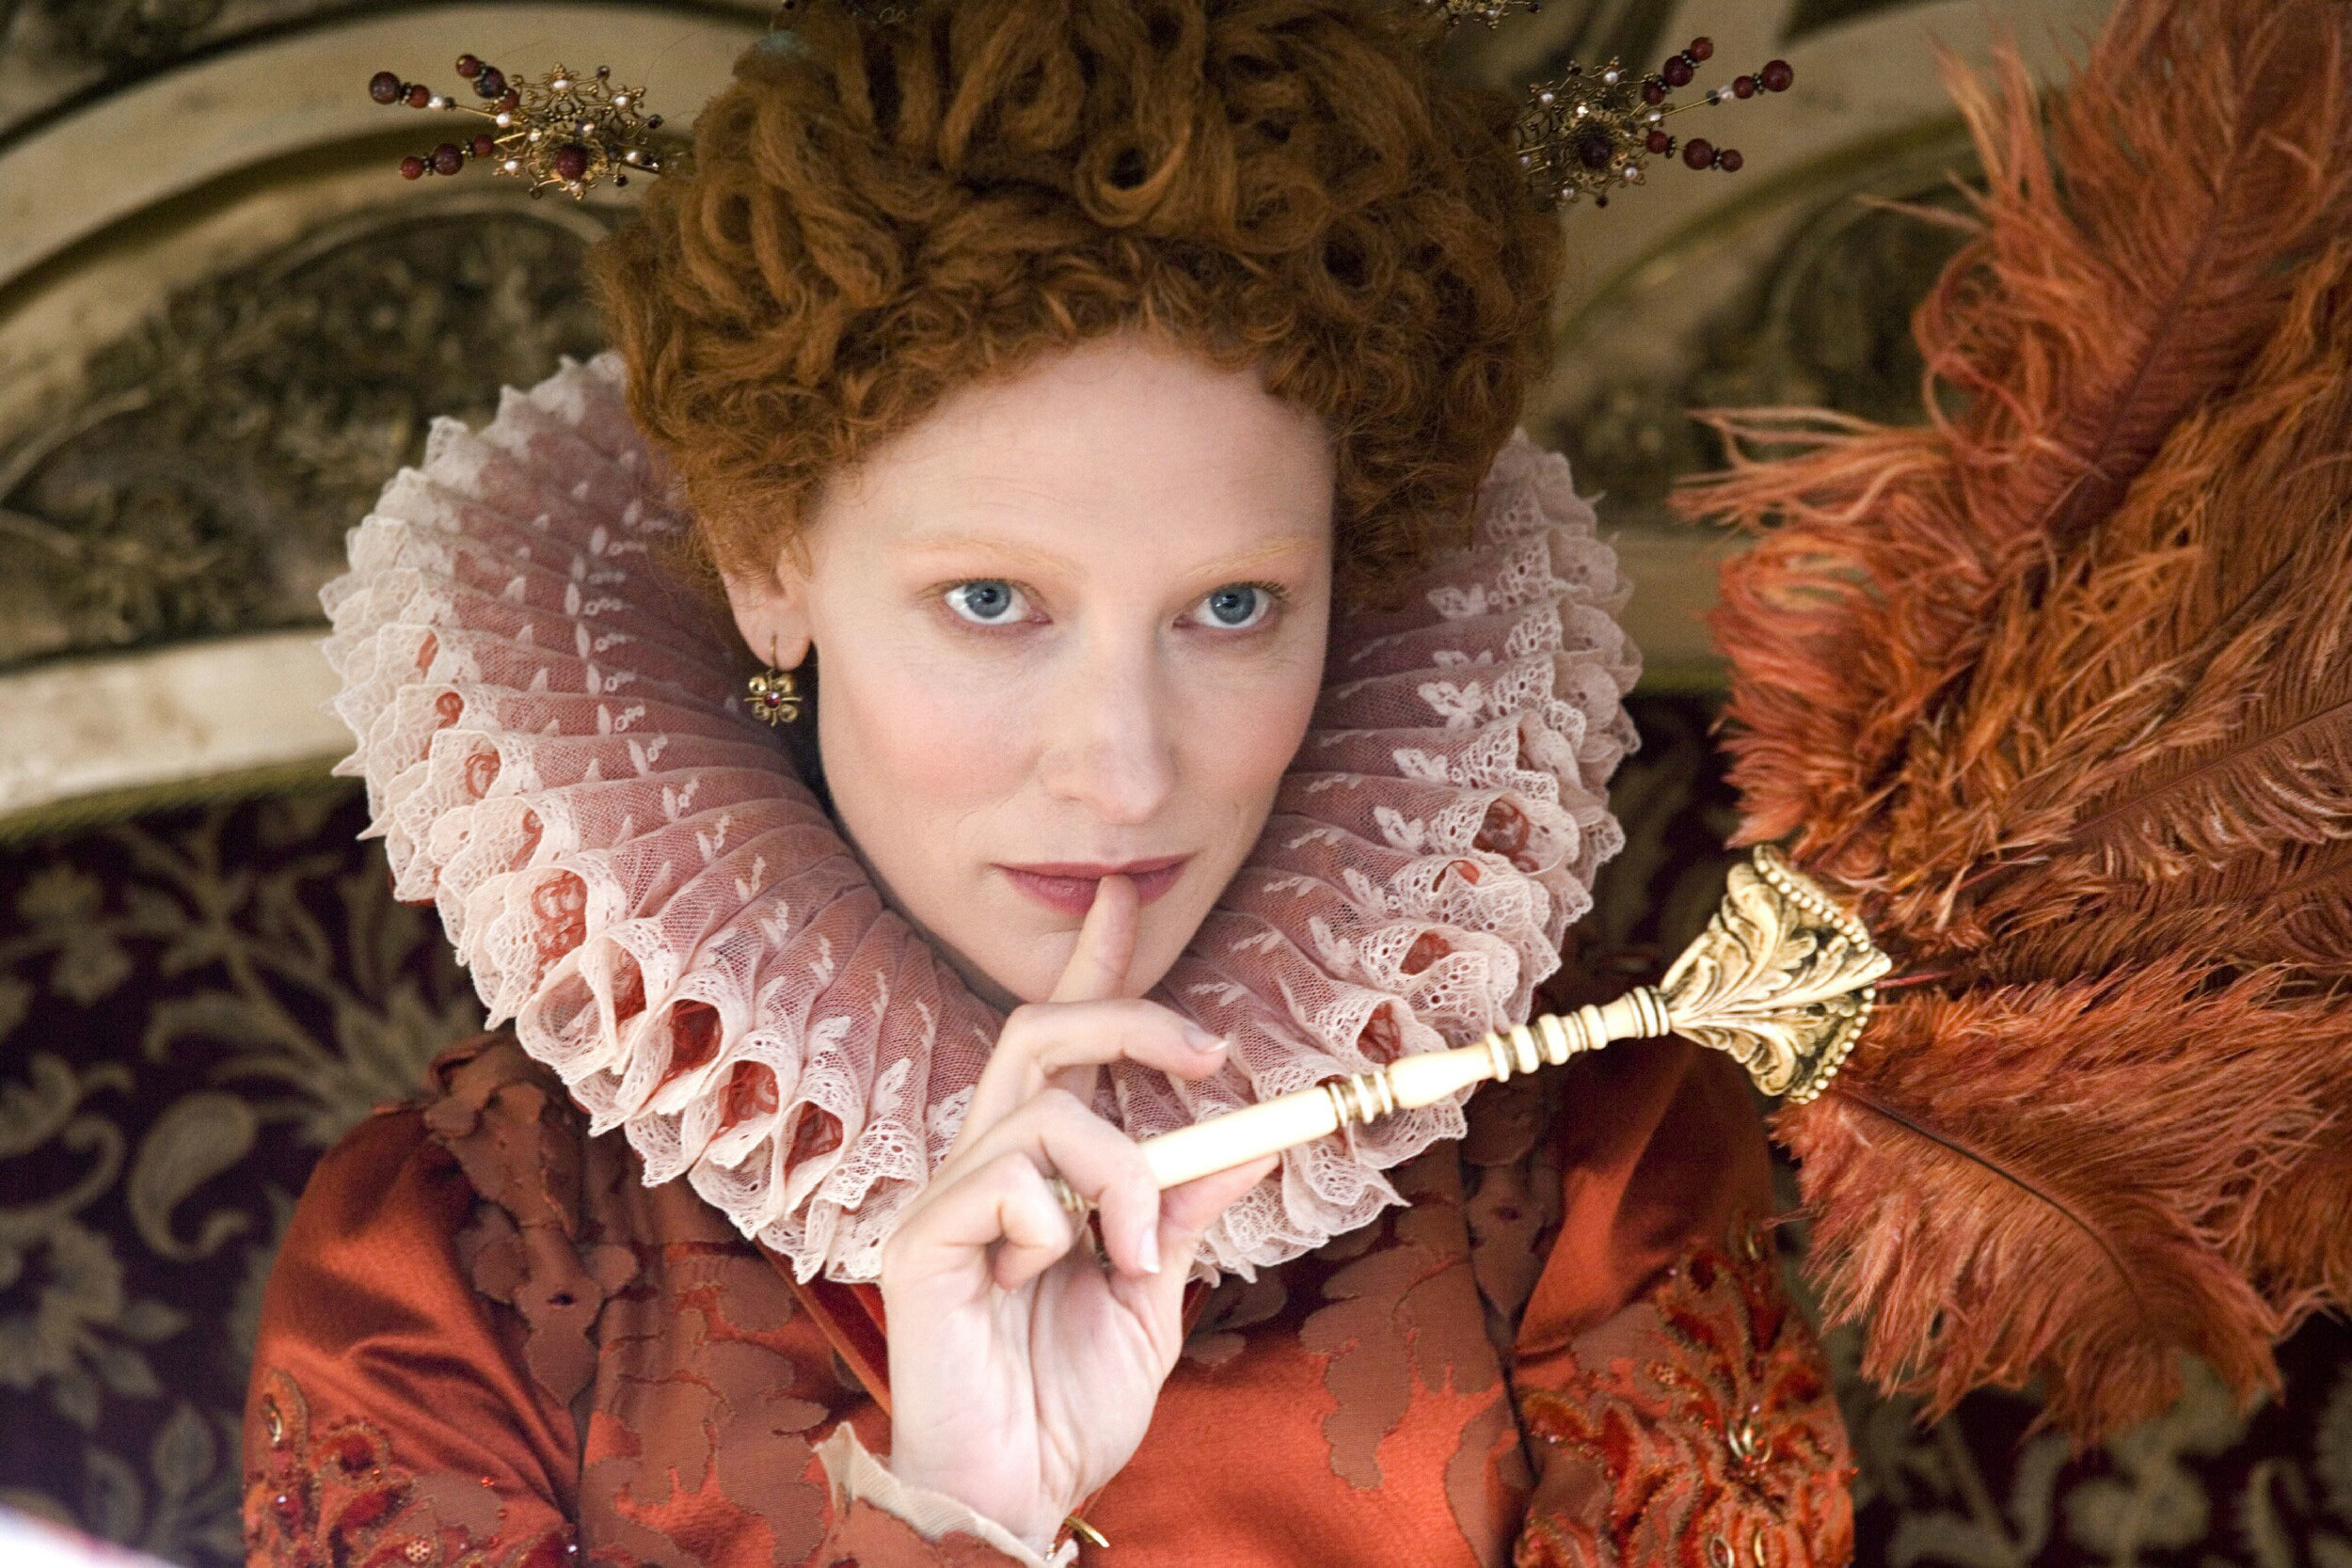 <p>About a decade after <em>Elizabeth</em>, director Shekhar Kapur reunited with his star for another film about Elizabeth I. This one covers the later period of her reign. Blanchett (and Geoffrey Rush) returned, and you’ll never guess what happened. Yes, Blanchett was nominated again for Best Actress, putting her in rare company among people who have been nominated more than once for playing the same character (or historical figure, in this case).</p><p><a href='https://www.msn.com/en-us/community/channel/vid-cj9pqbr0vn9in2b6ddcd8sfgpfq6x6utp44fssrv6mc2gtybw0us'>Follow us on MSN to see more of our exclusive entertainment content.</a></p>